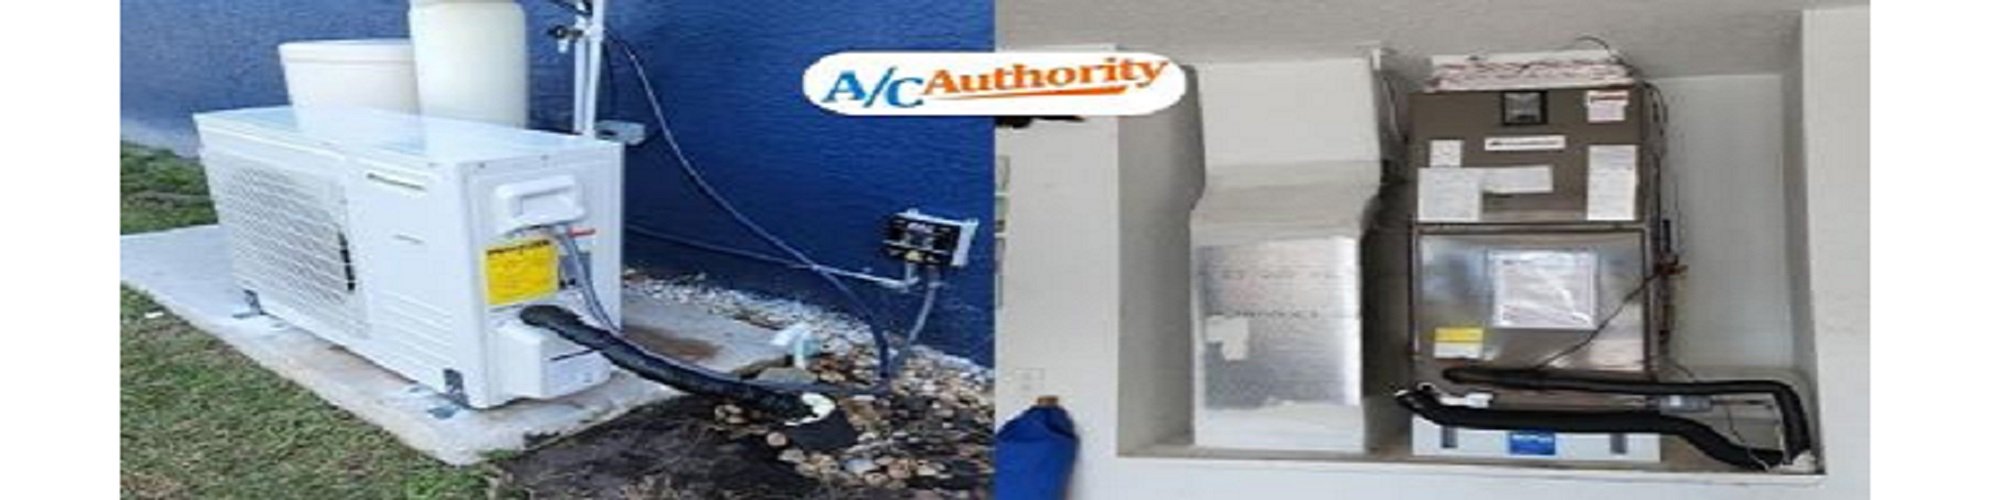 A/C Authority Inc. cover